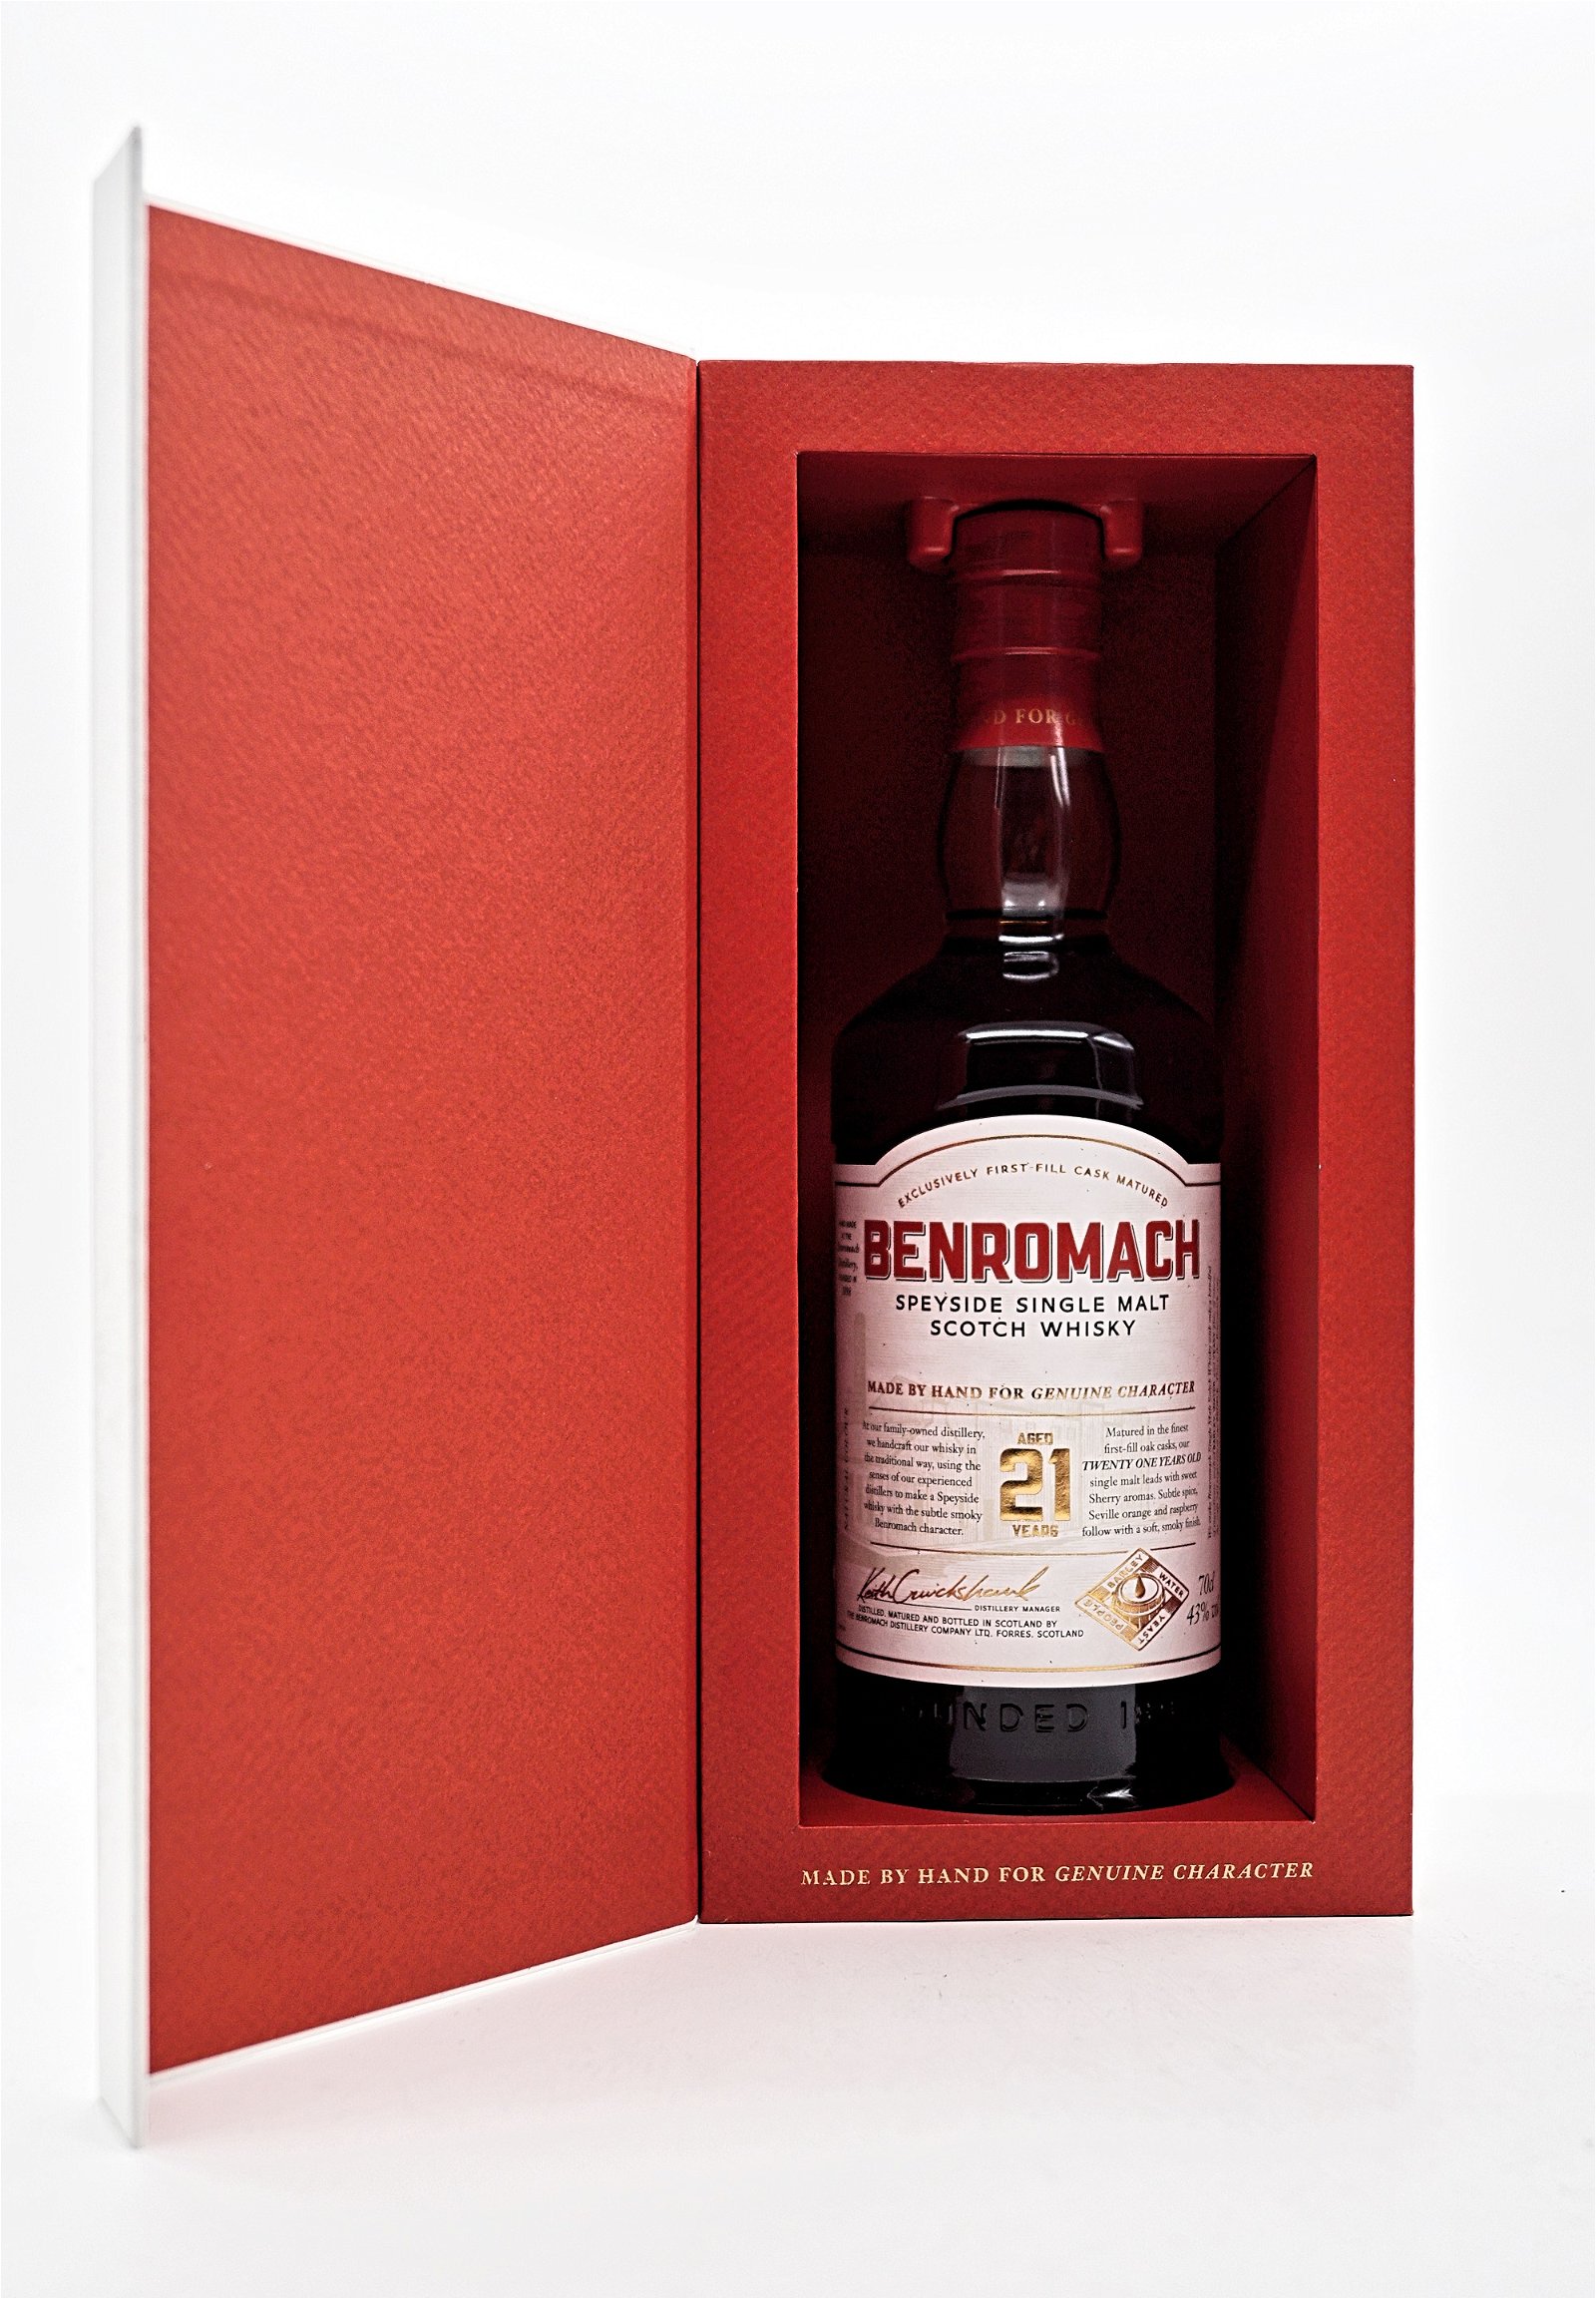 Benromach 21 Jahre Exclusively First-Fill Cask Matured Speyside Single Malt Scotch Whisky